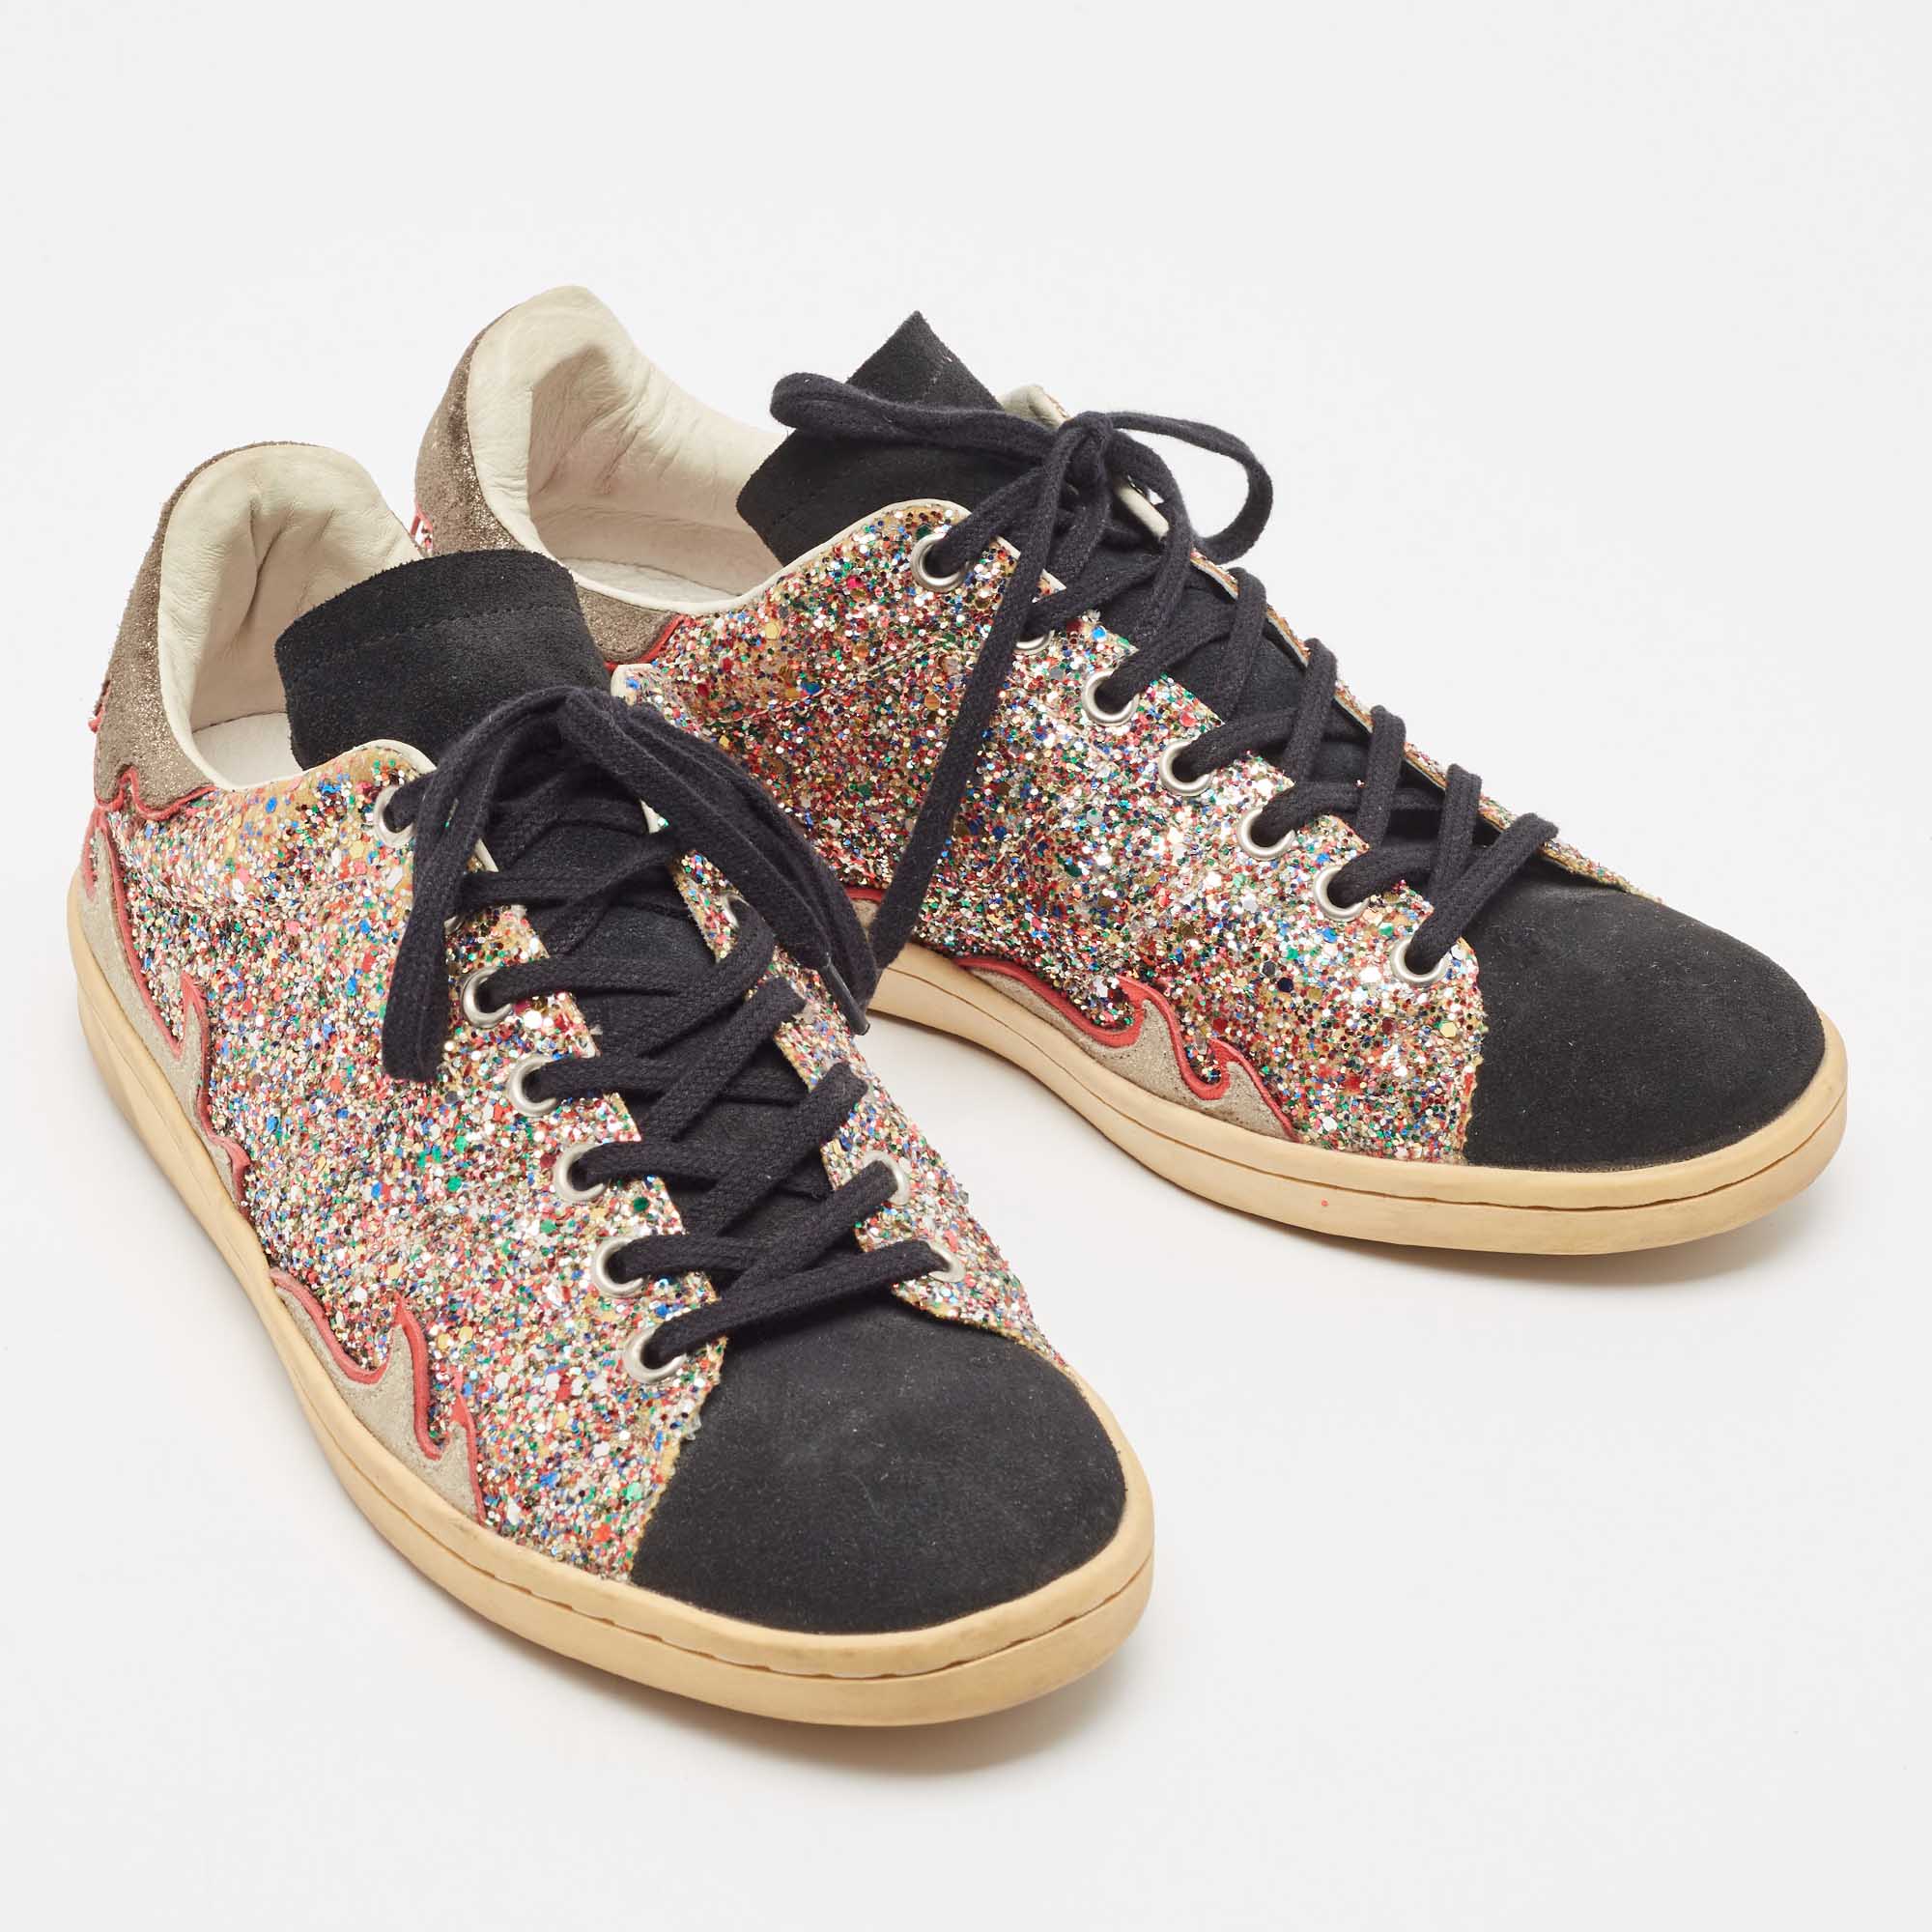 Isabel Marant Multicolor Glitter And Suede Gilly Low Top Sneakers Size 40